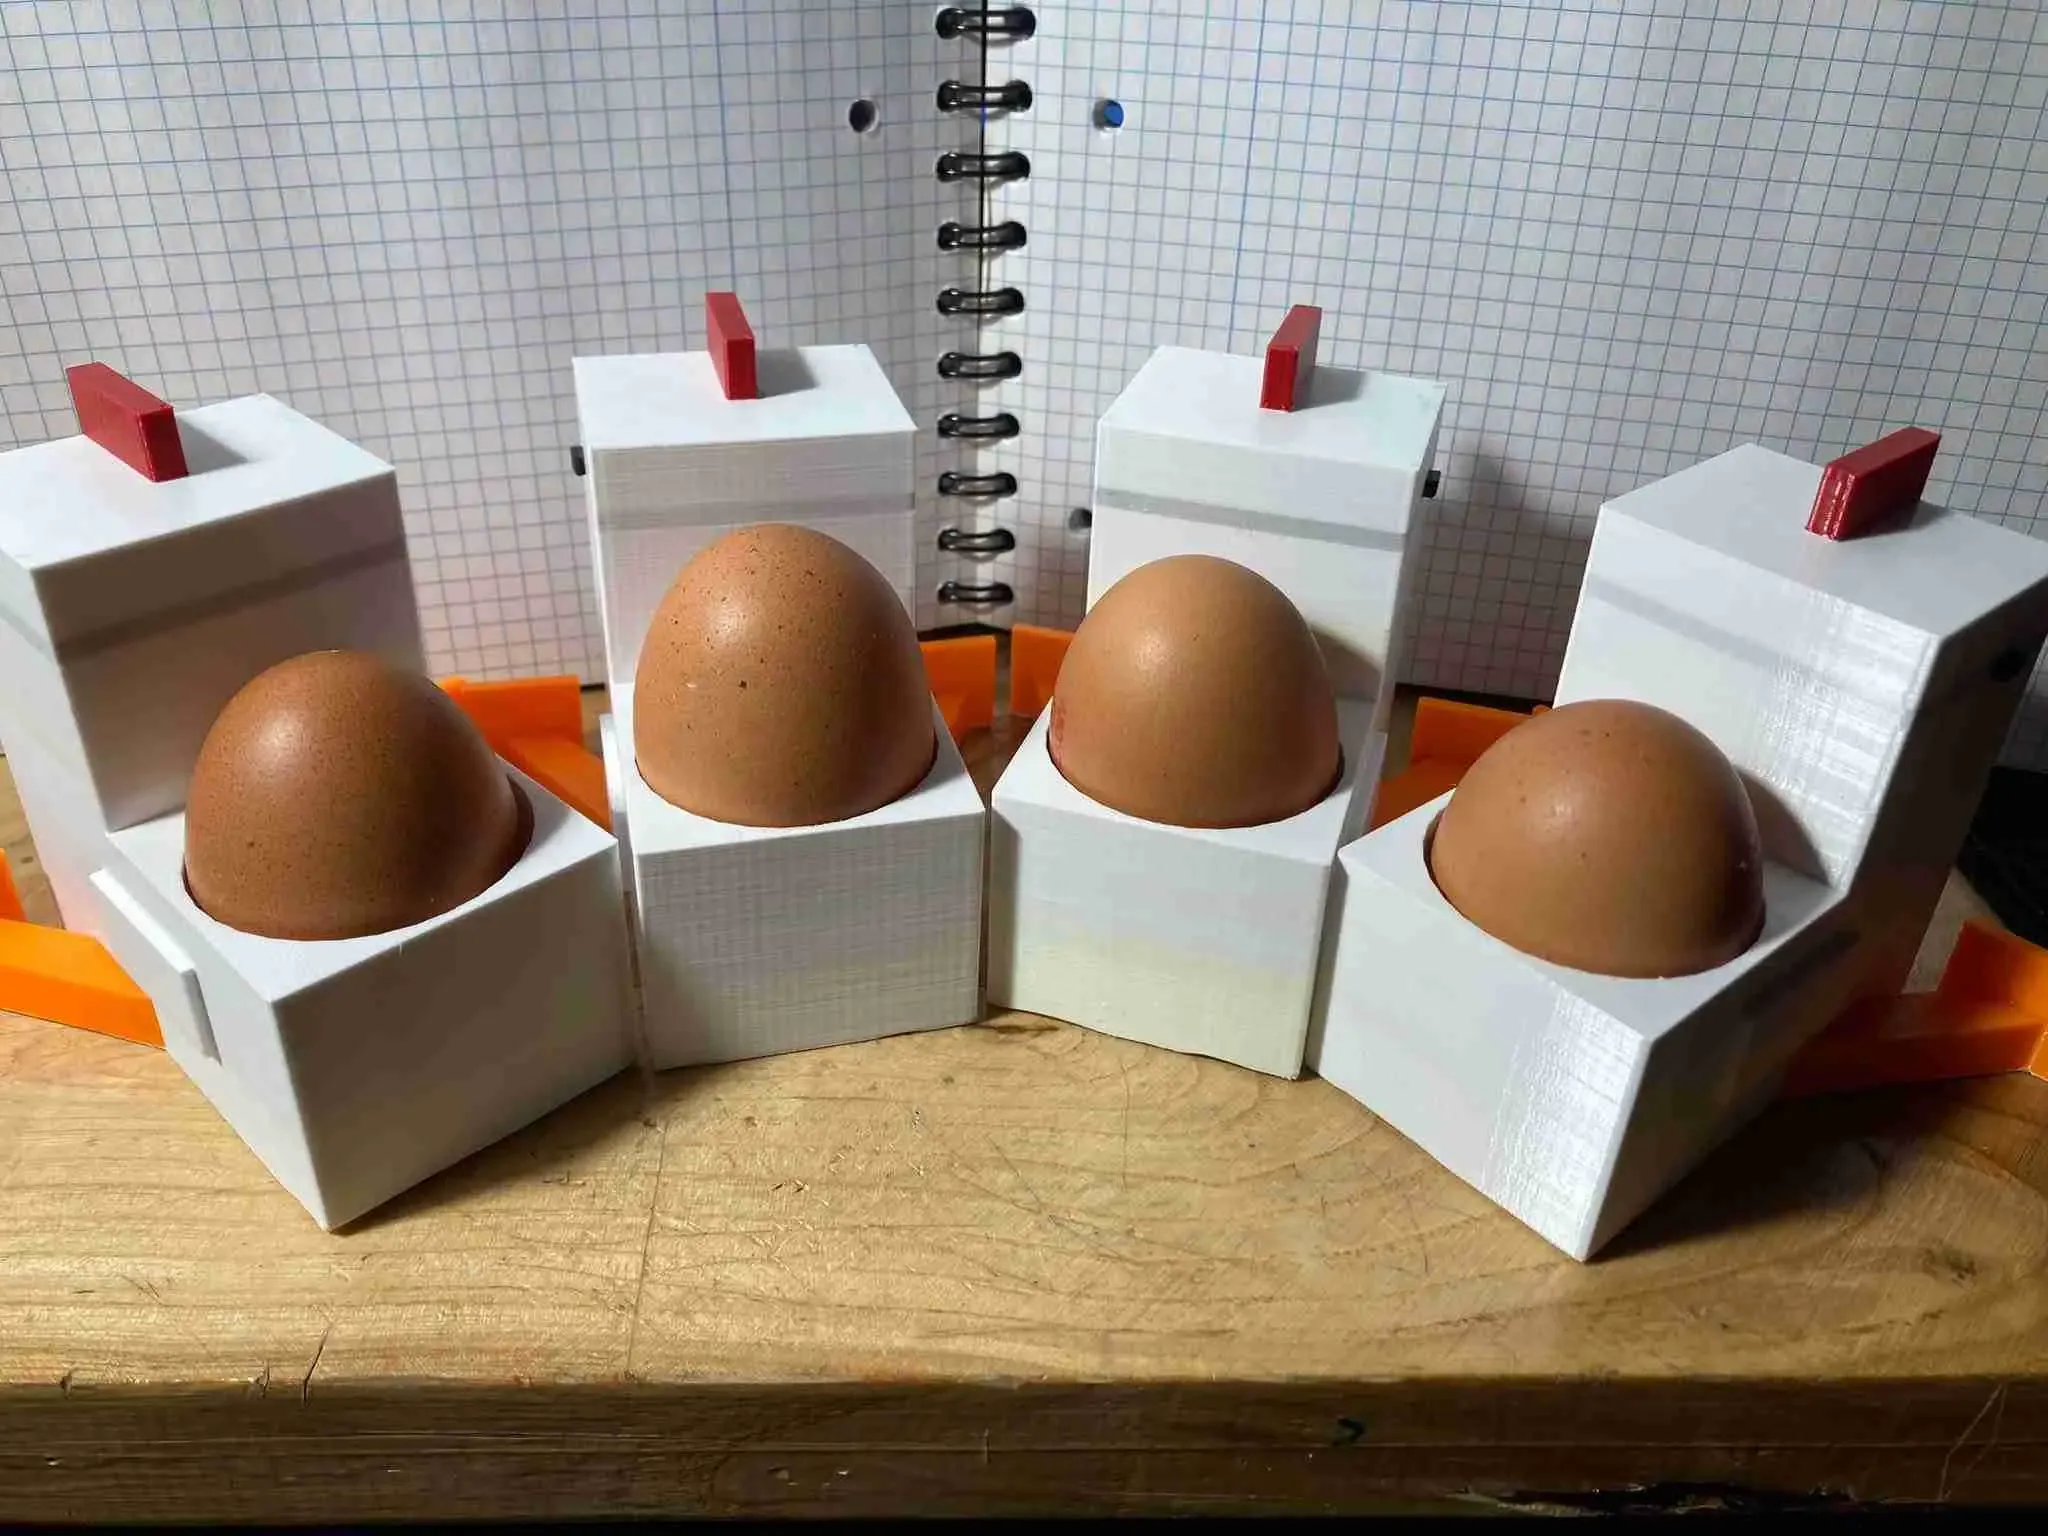 EGG CUP FOR EASTER HOLIDAYS